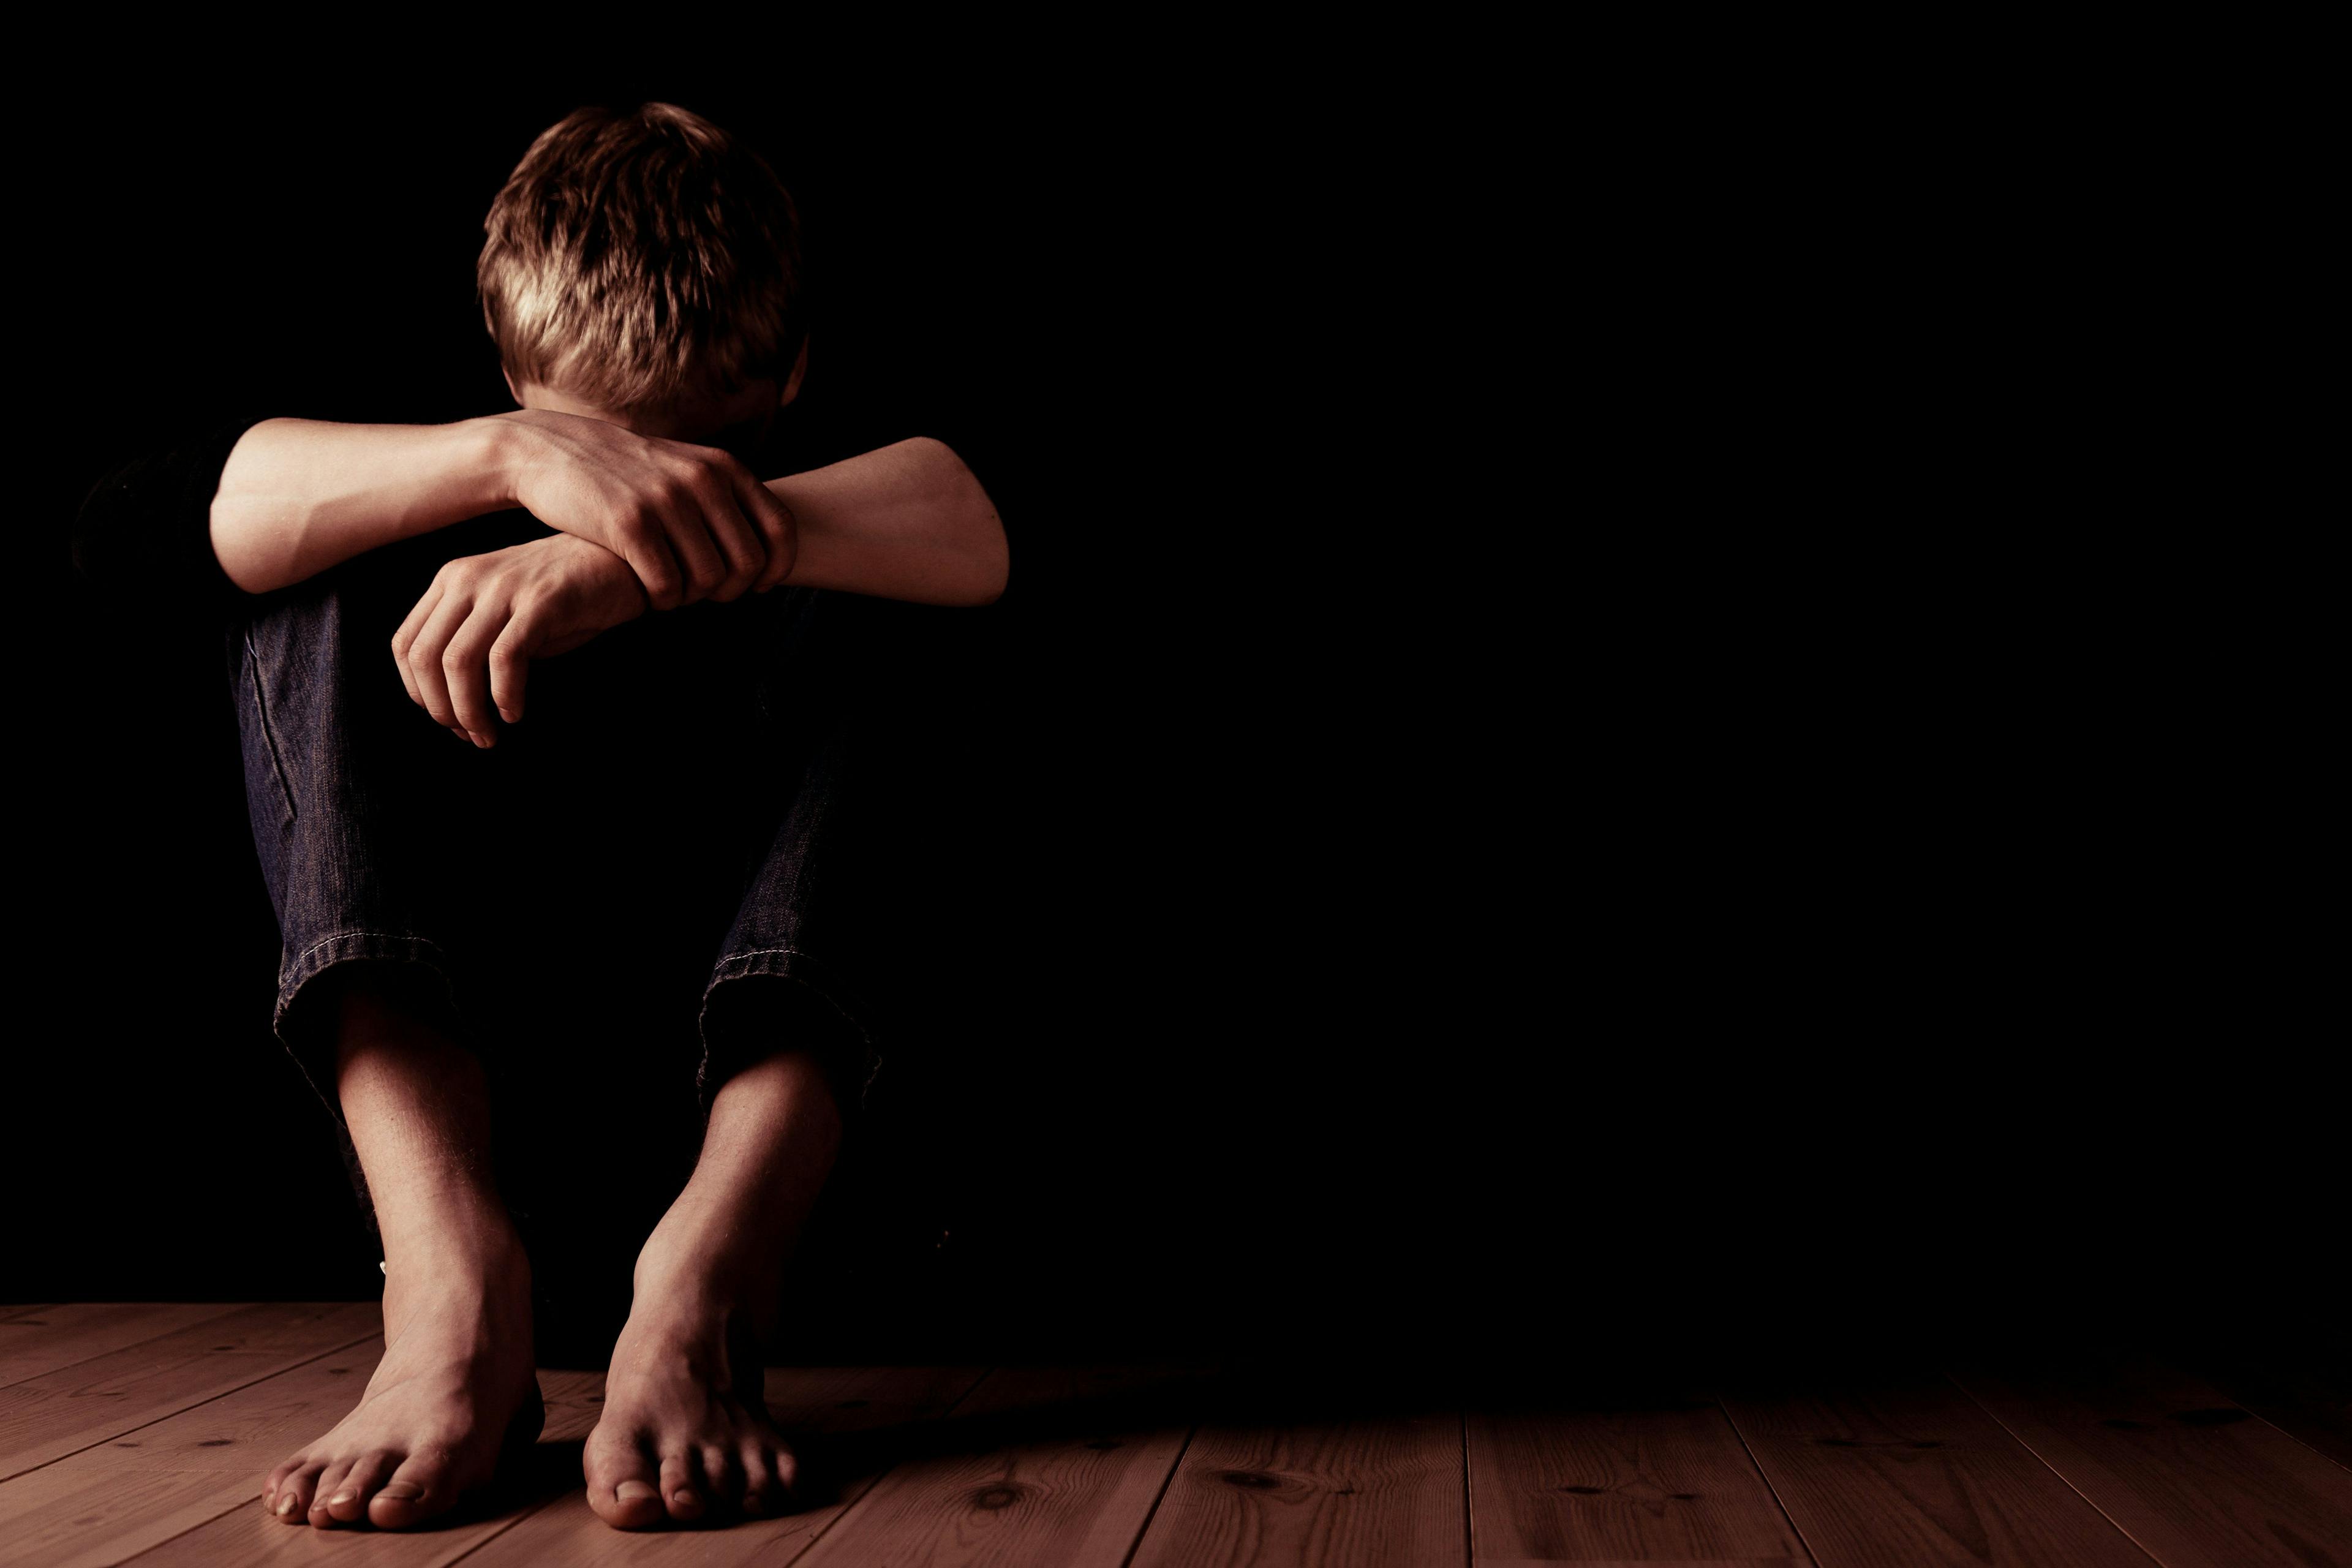 Child and Adolescent Suicide and Self Harm: Treatment and Prevention